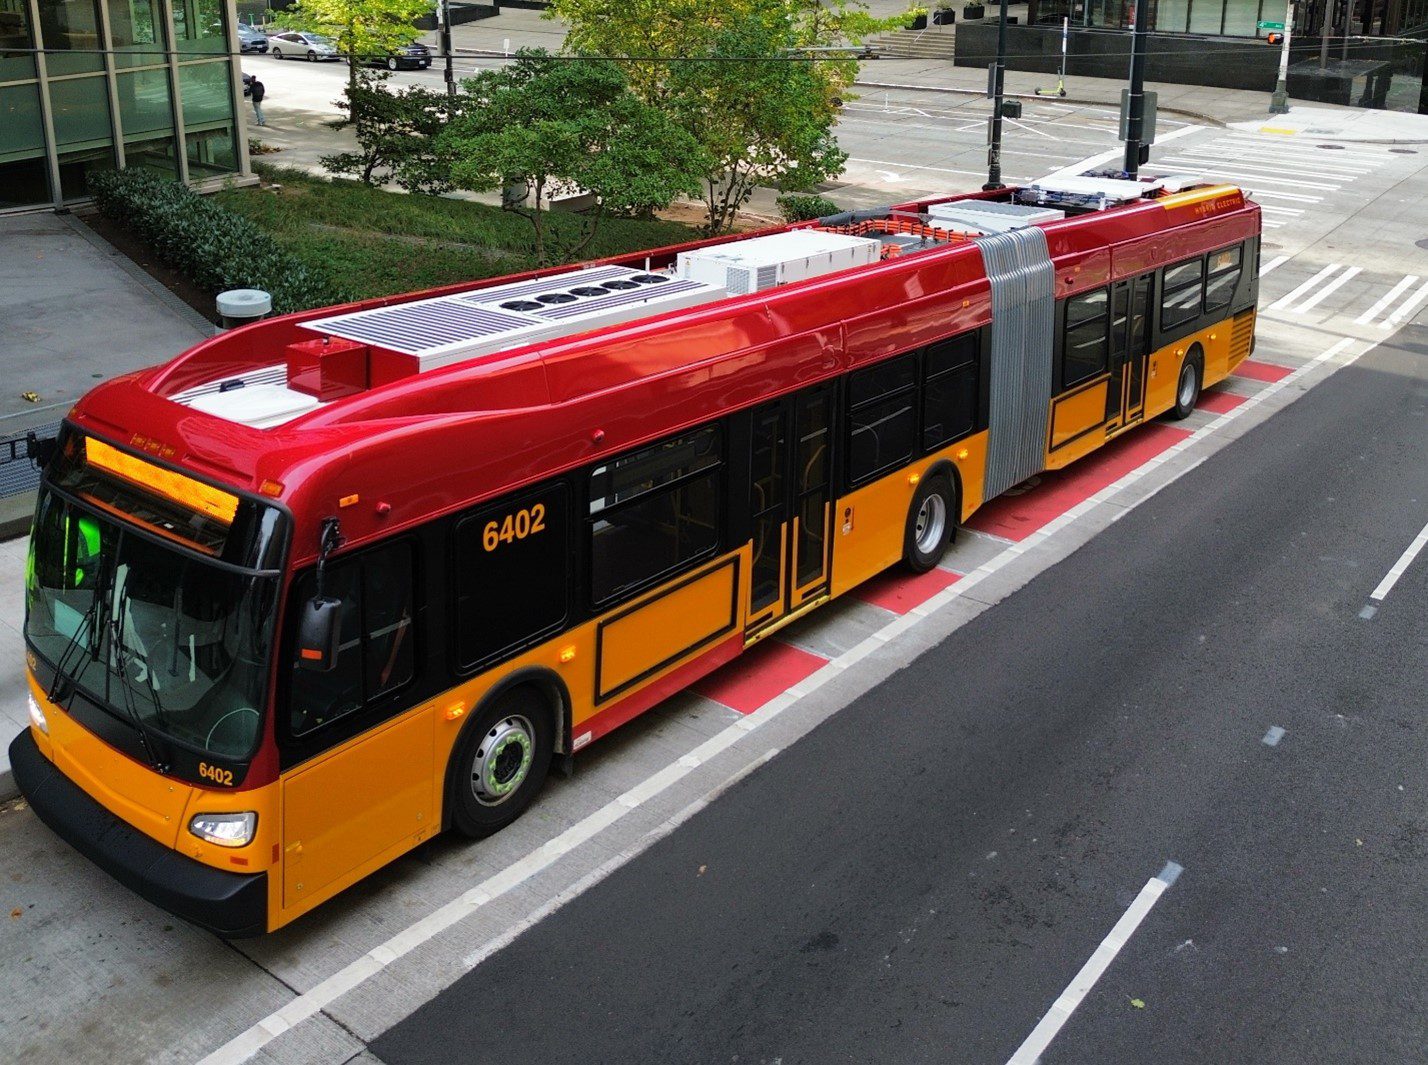 A large red RapidRide bus sits in a red bus only lane in the city. Several trees are in the background.